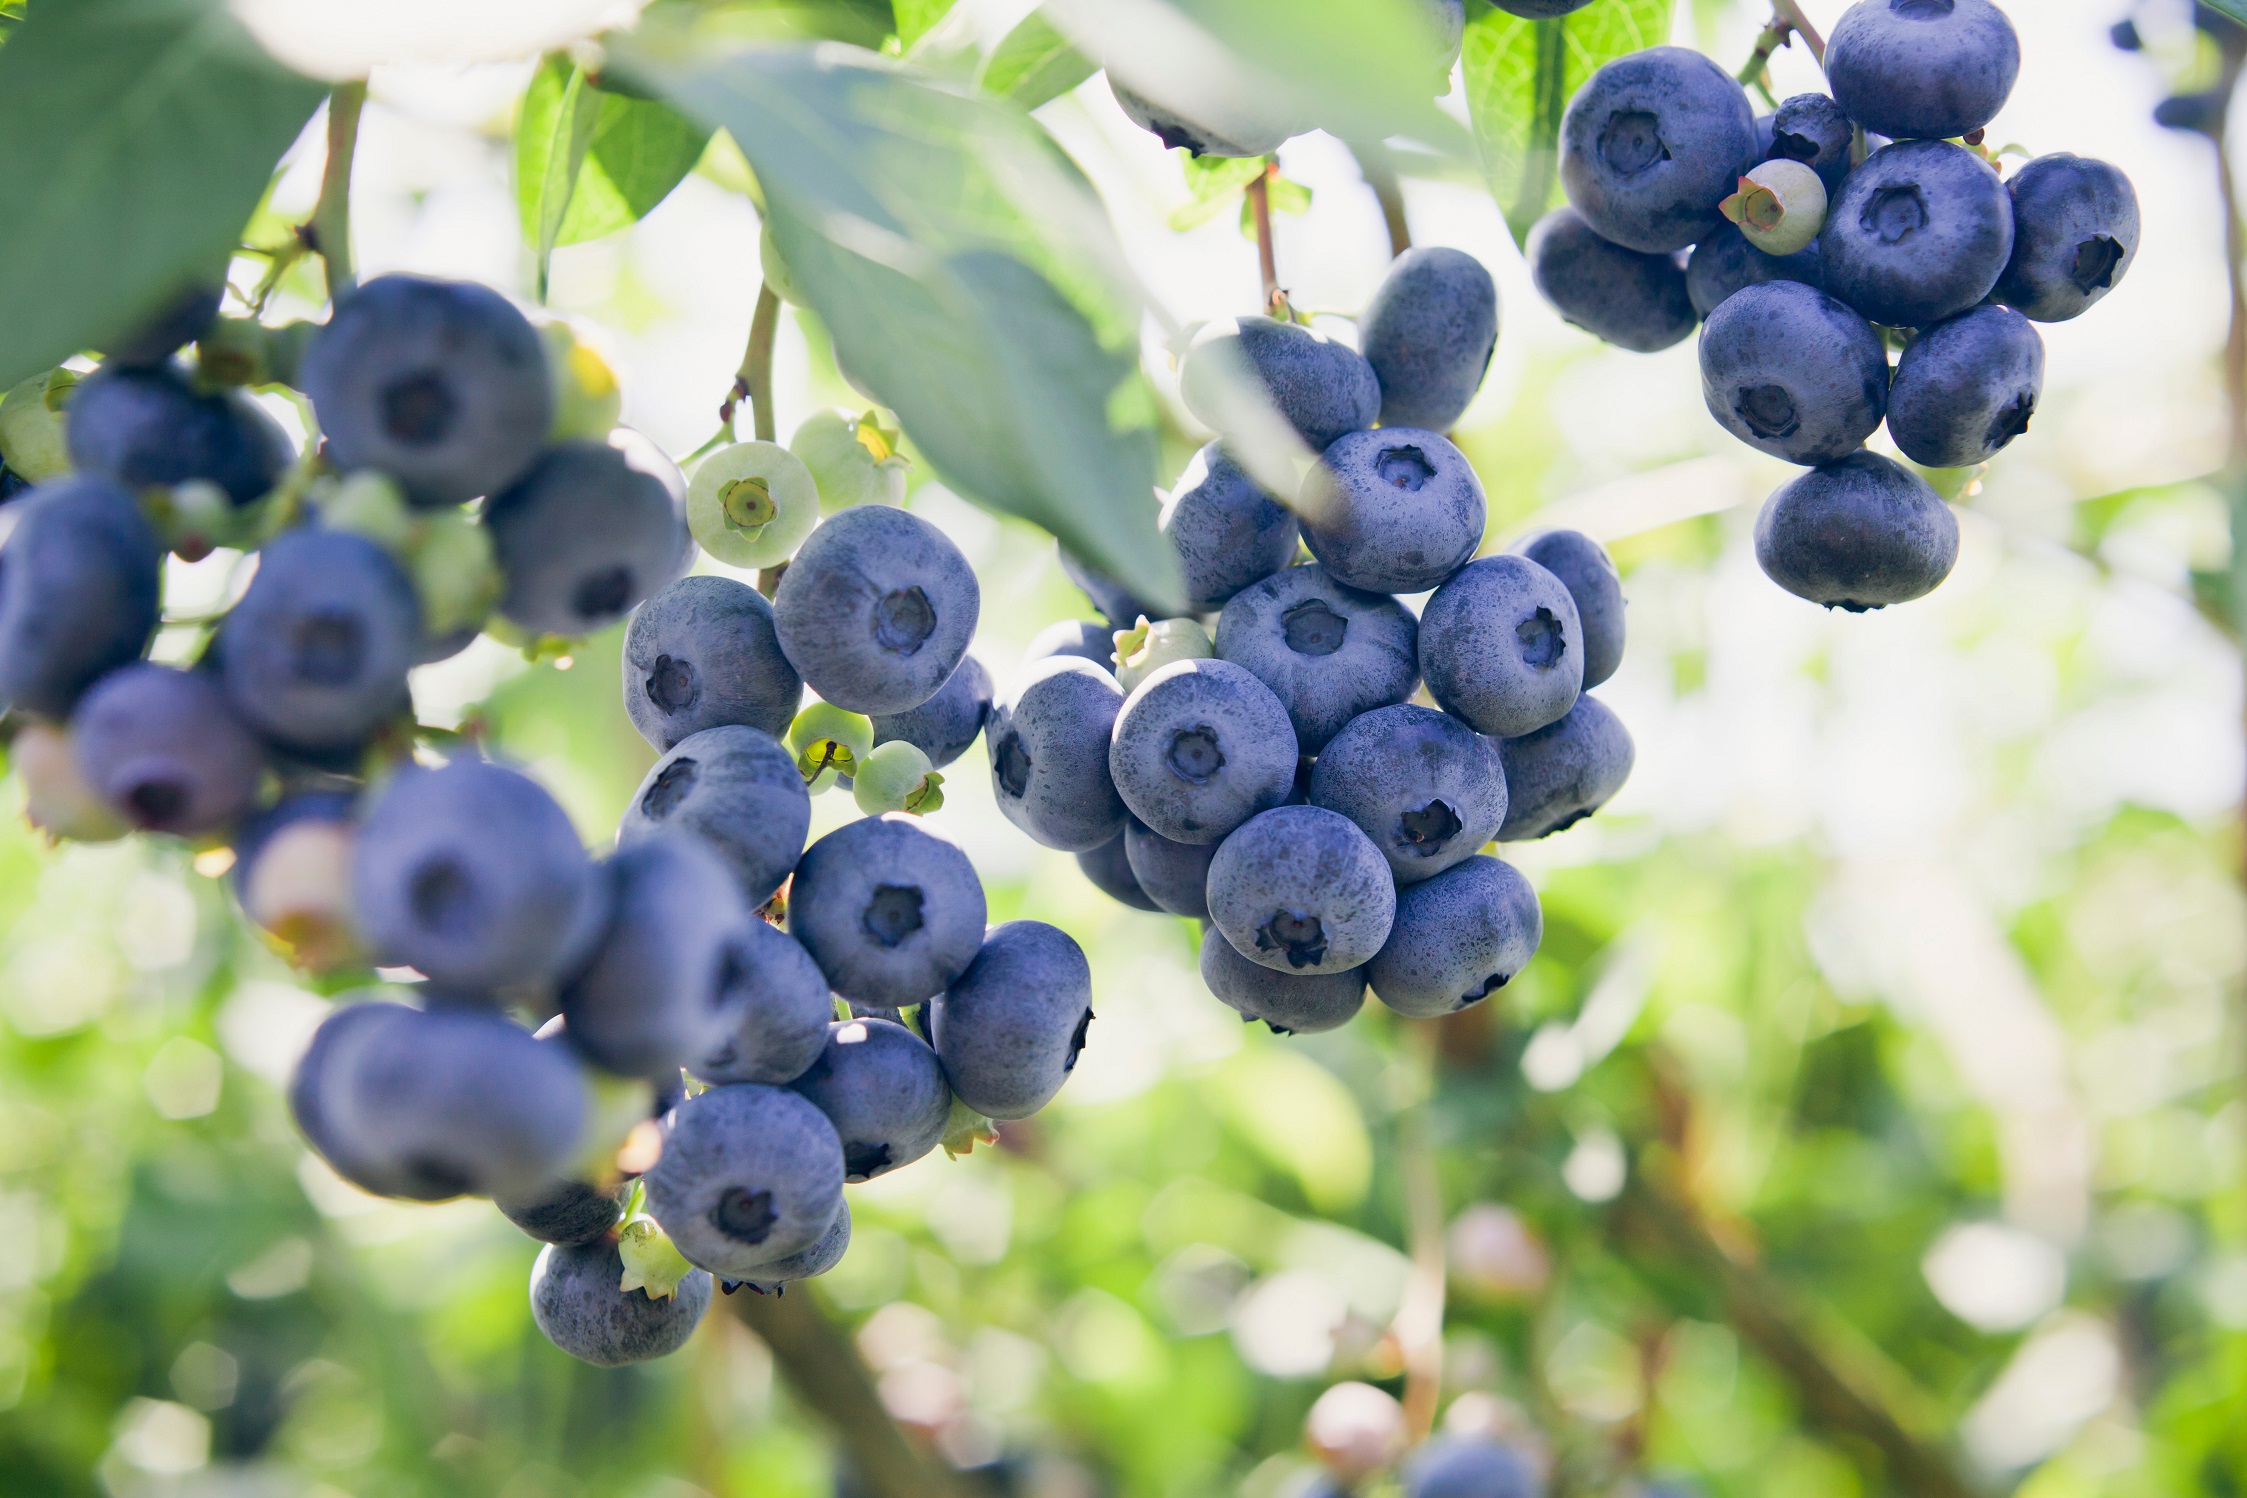 UAE’s First Blueberry Producer Elite Agro To Double Production Capacity To Meet Growing Regional Demand